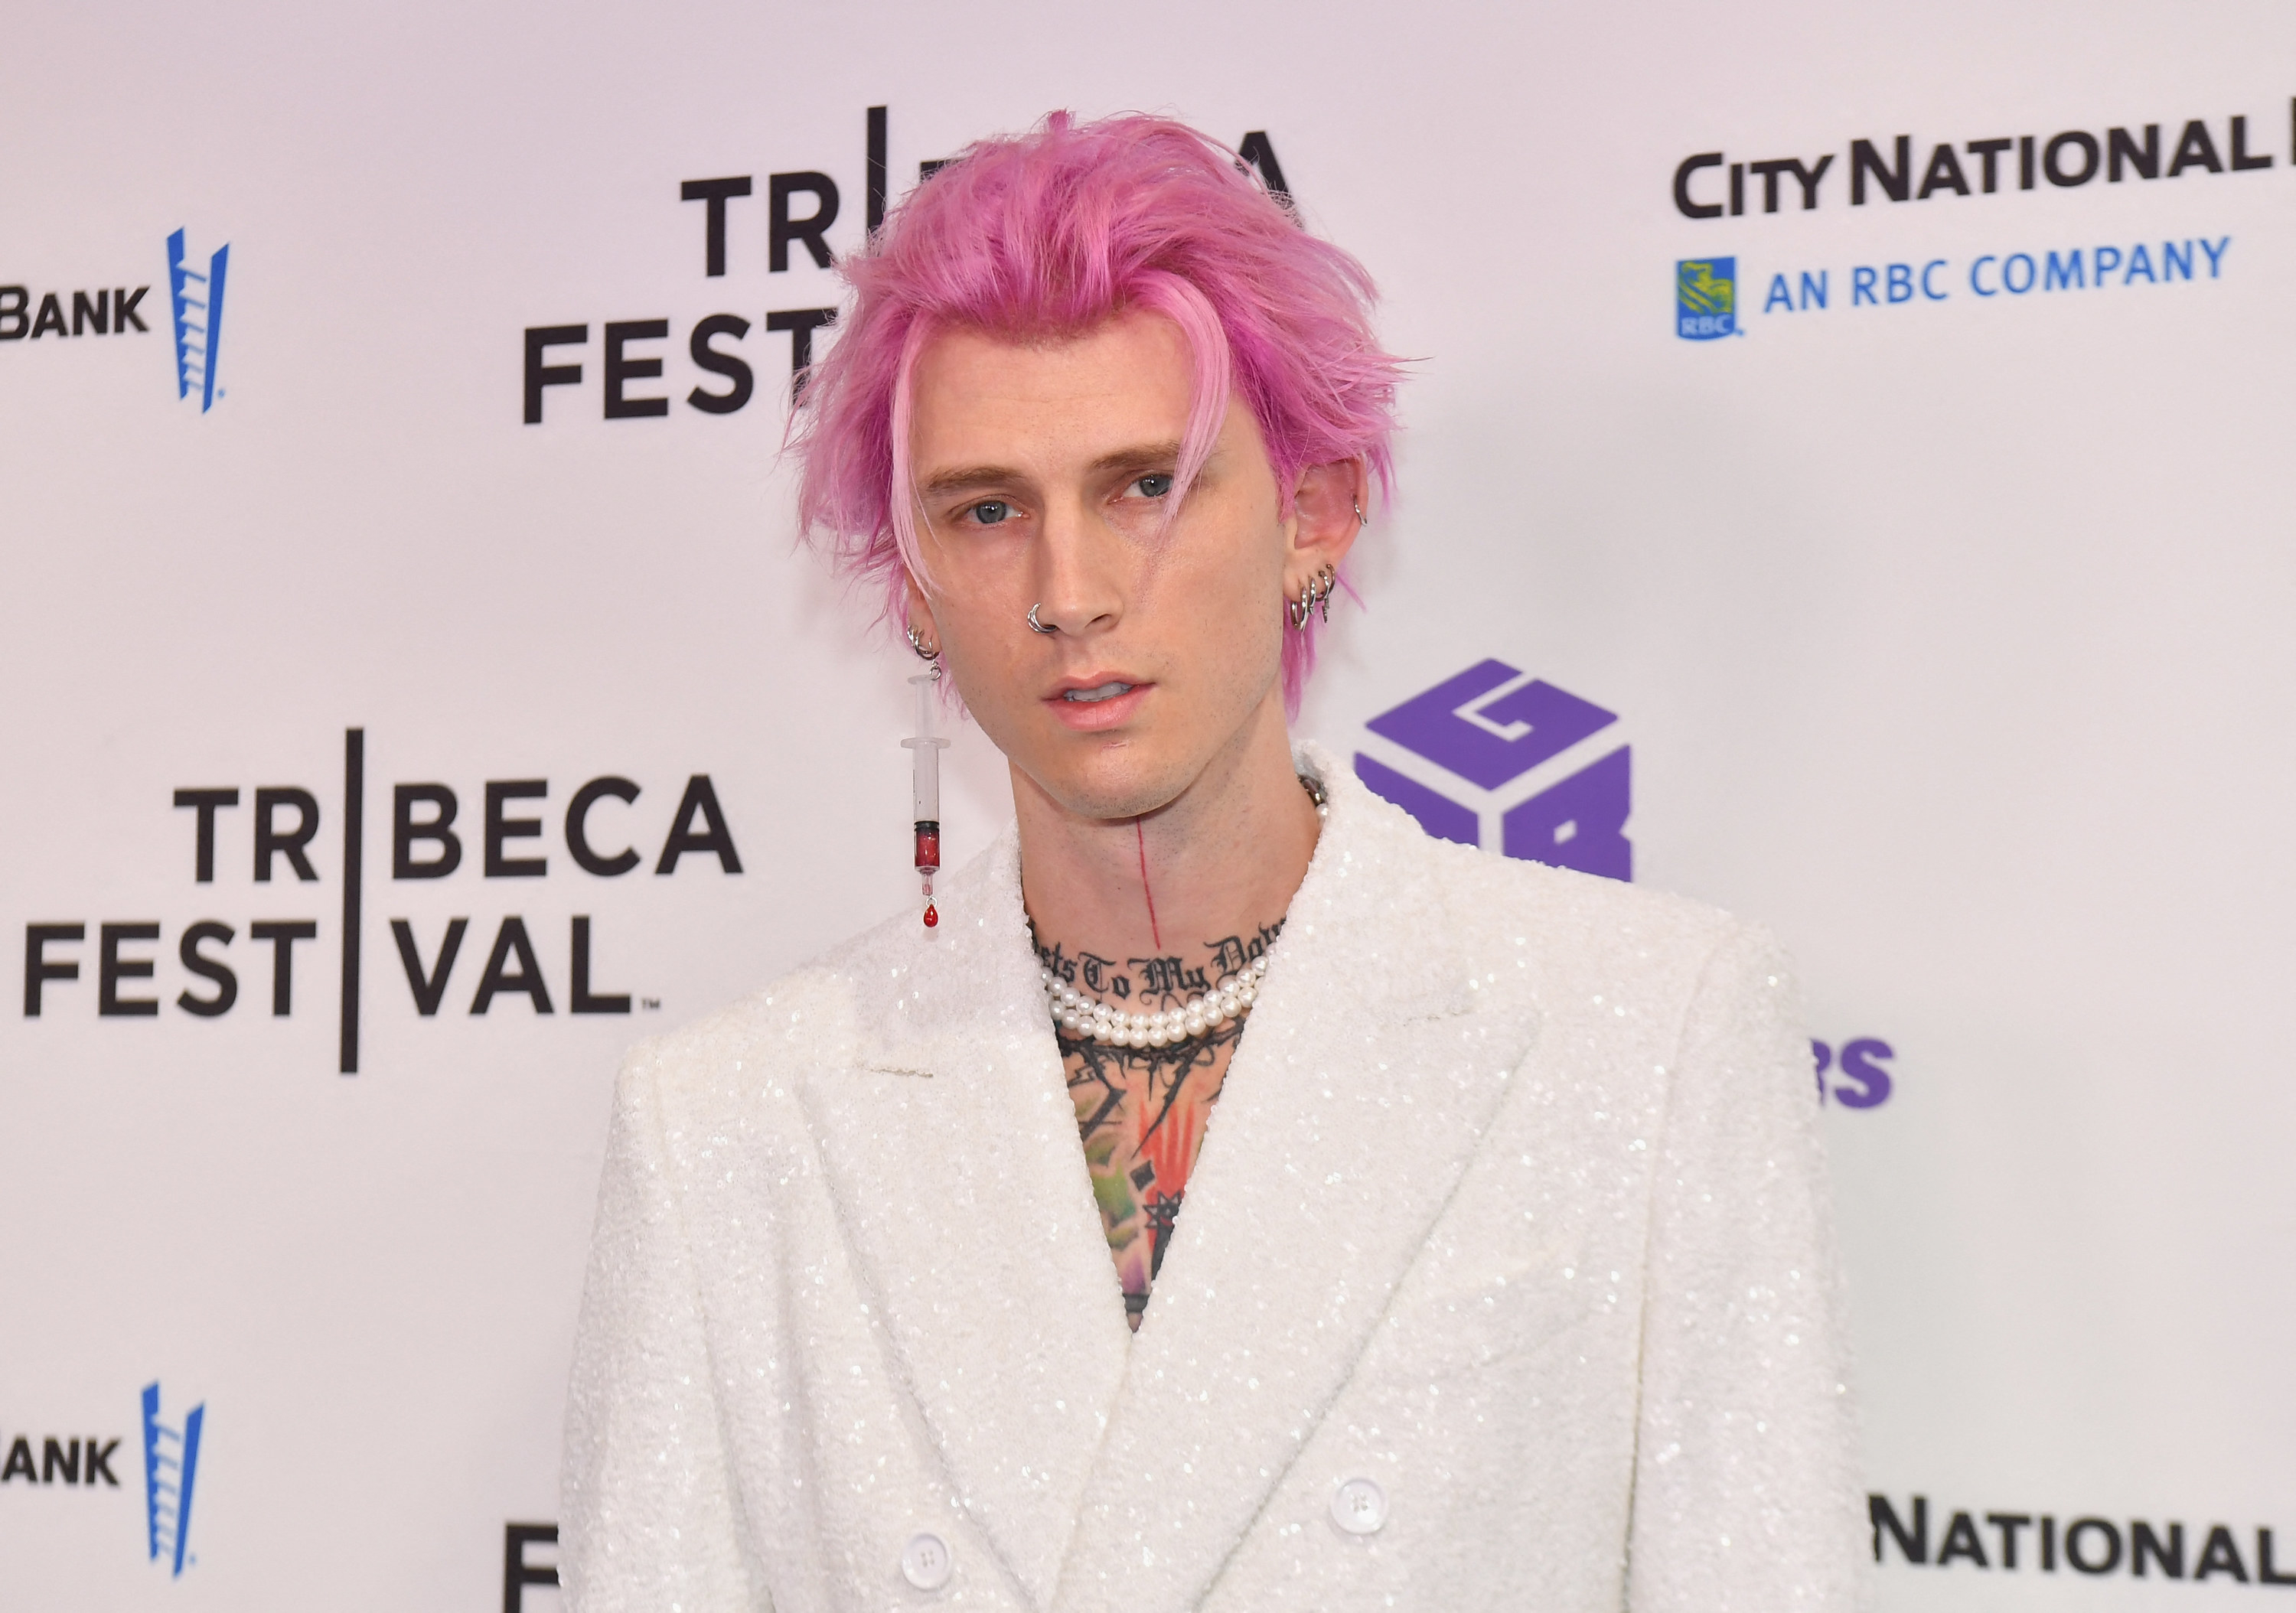 MGK posing on the red carpet, his hair long and his suit beaded